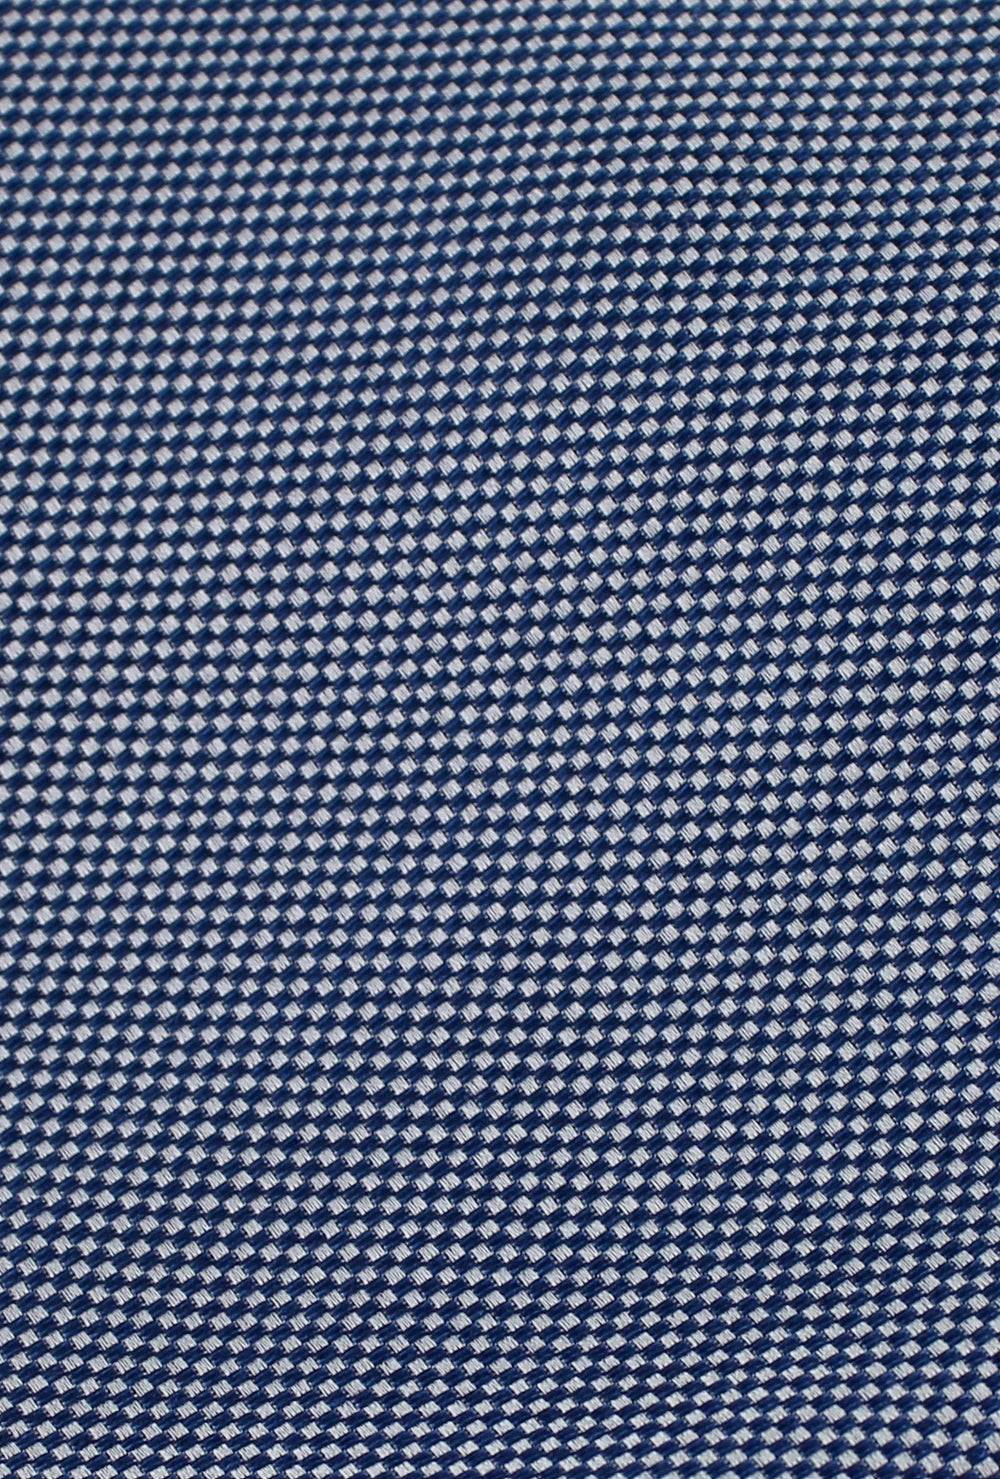 Navy blue tie with white patterns